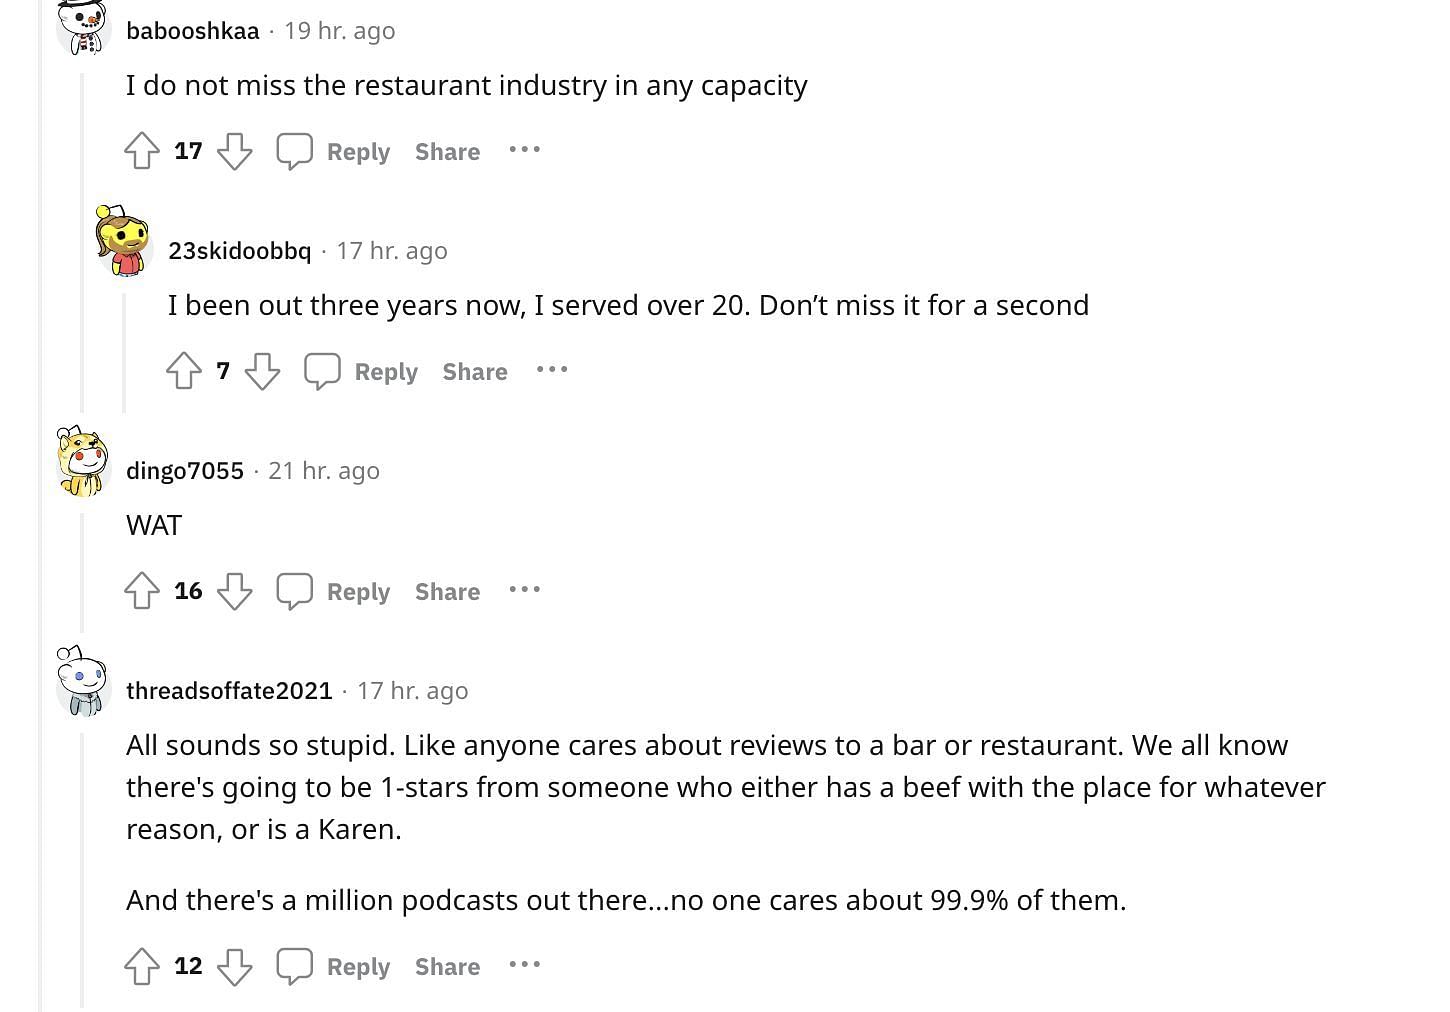 Social media users slam the podcast hosts and the woman who has been accused of stalking as the video goes viral. (Image via Reddit)